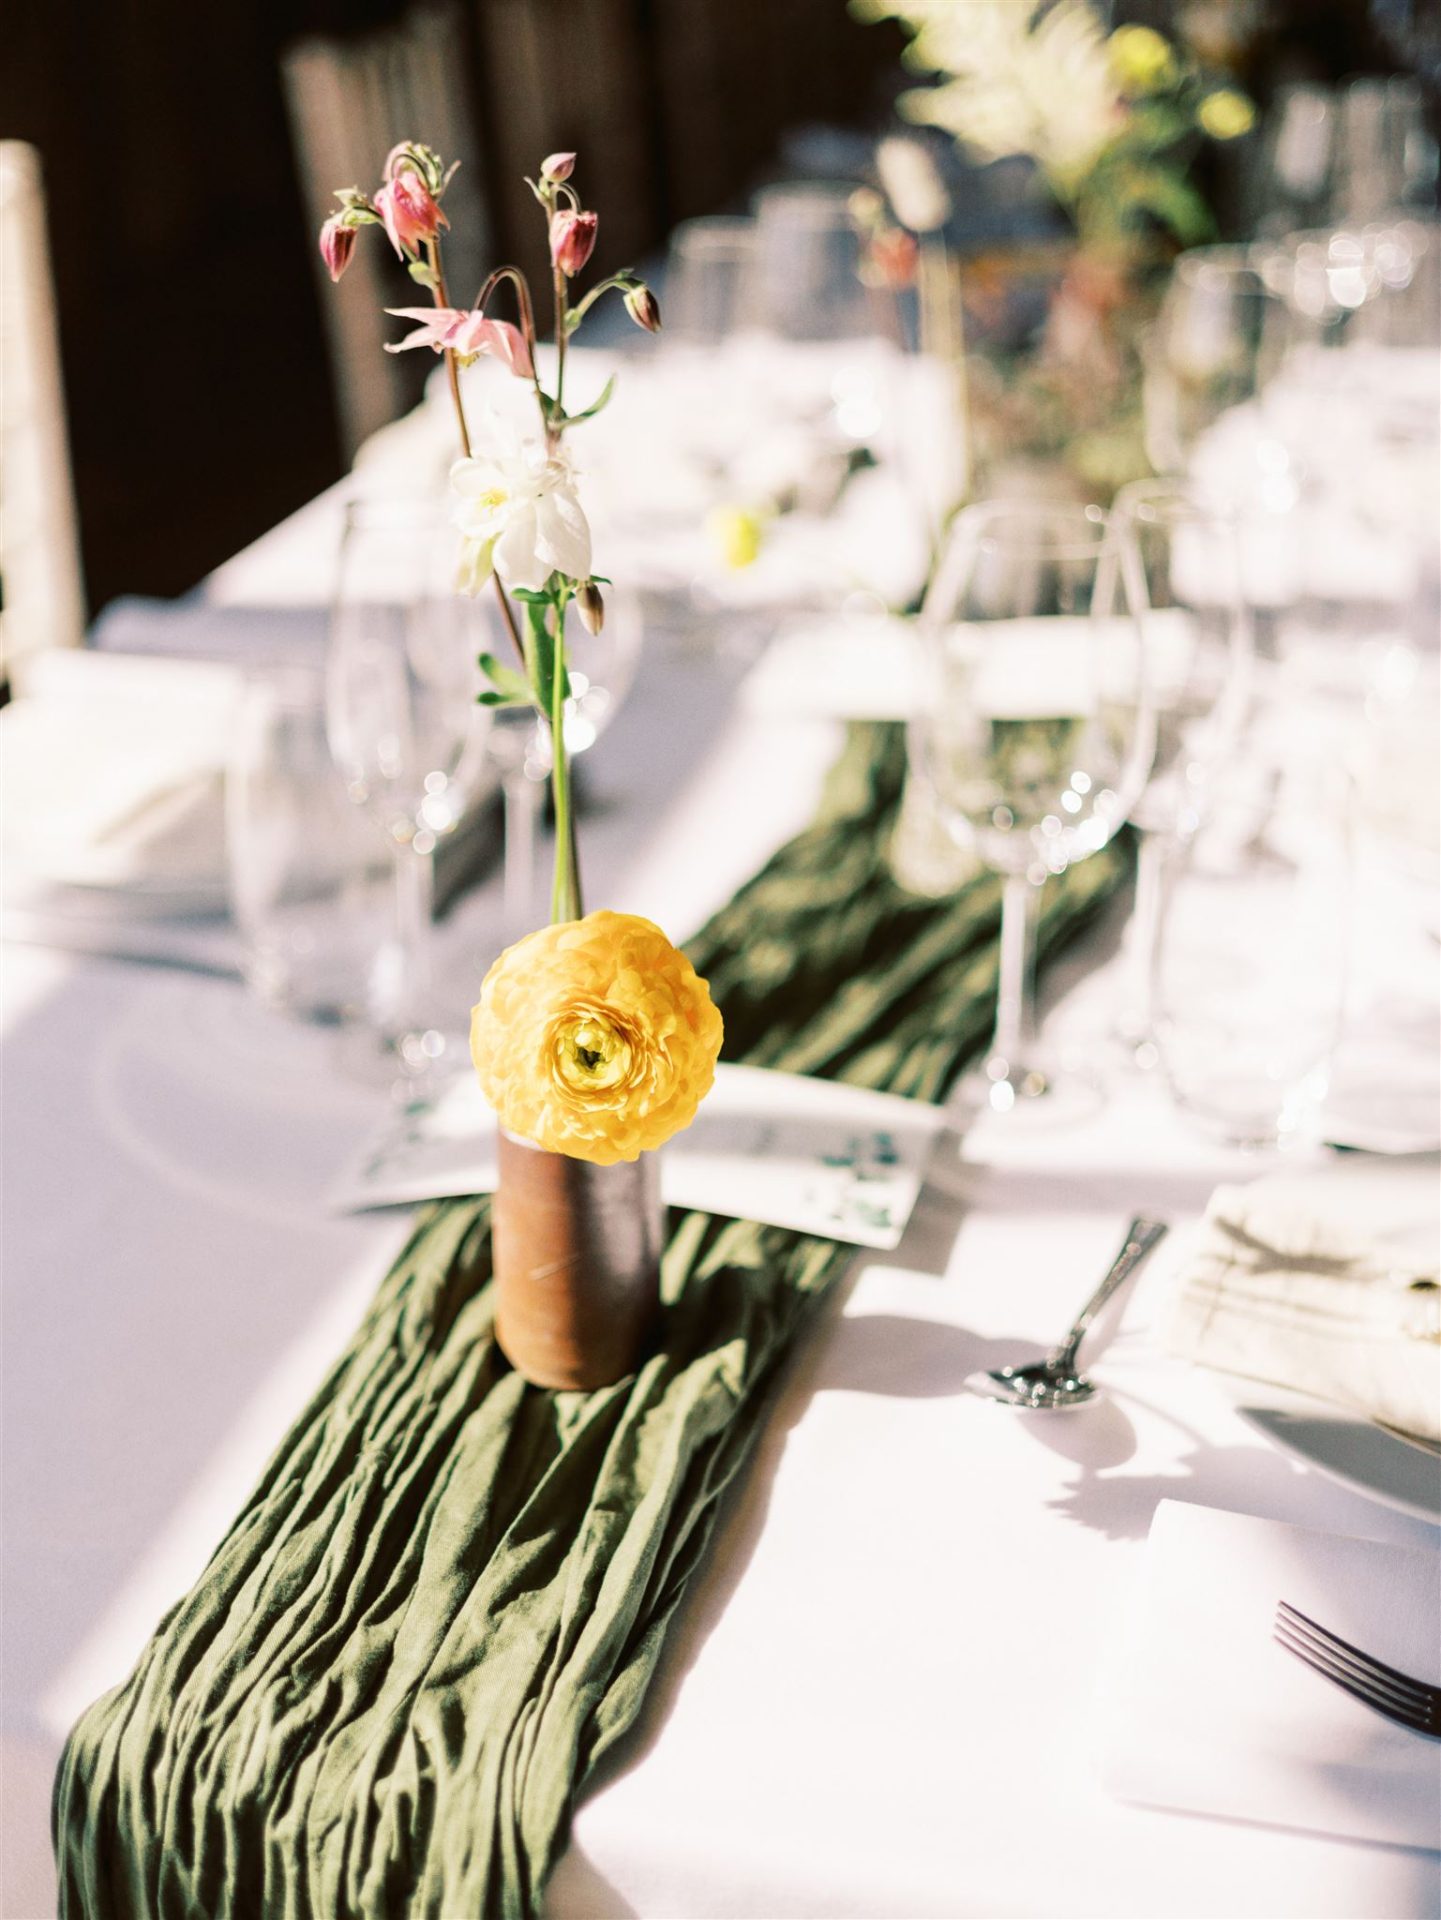 white linen, forest green table runner and stone bud vases with small yellow flower in it